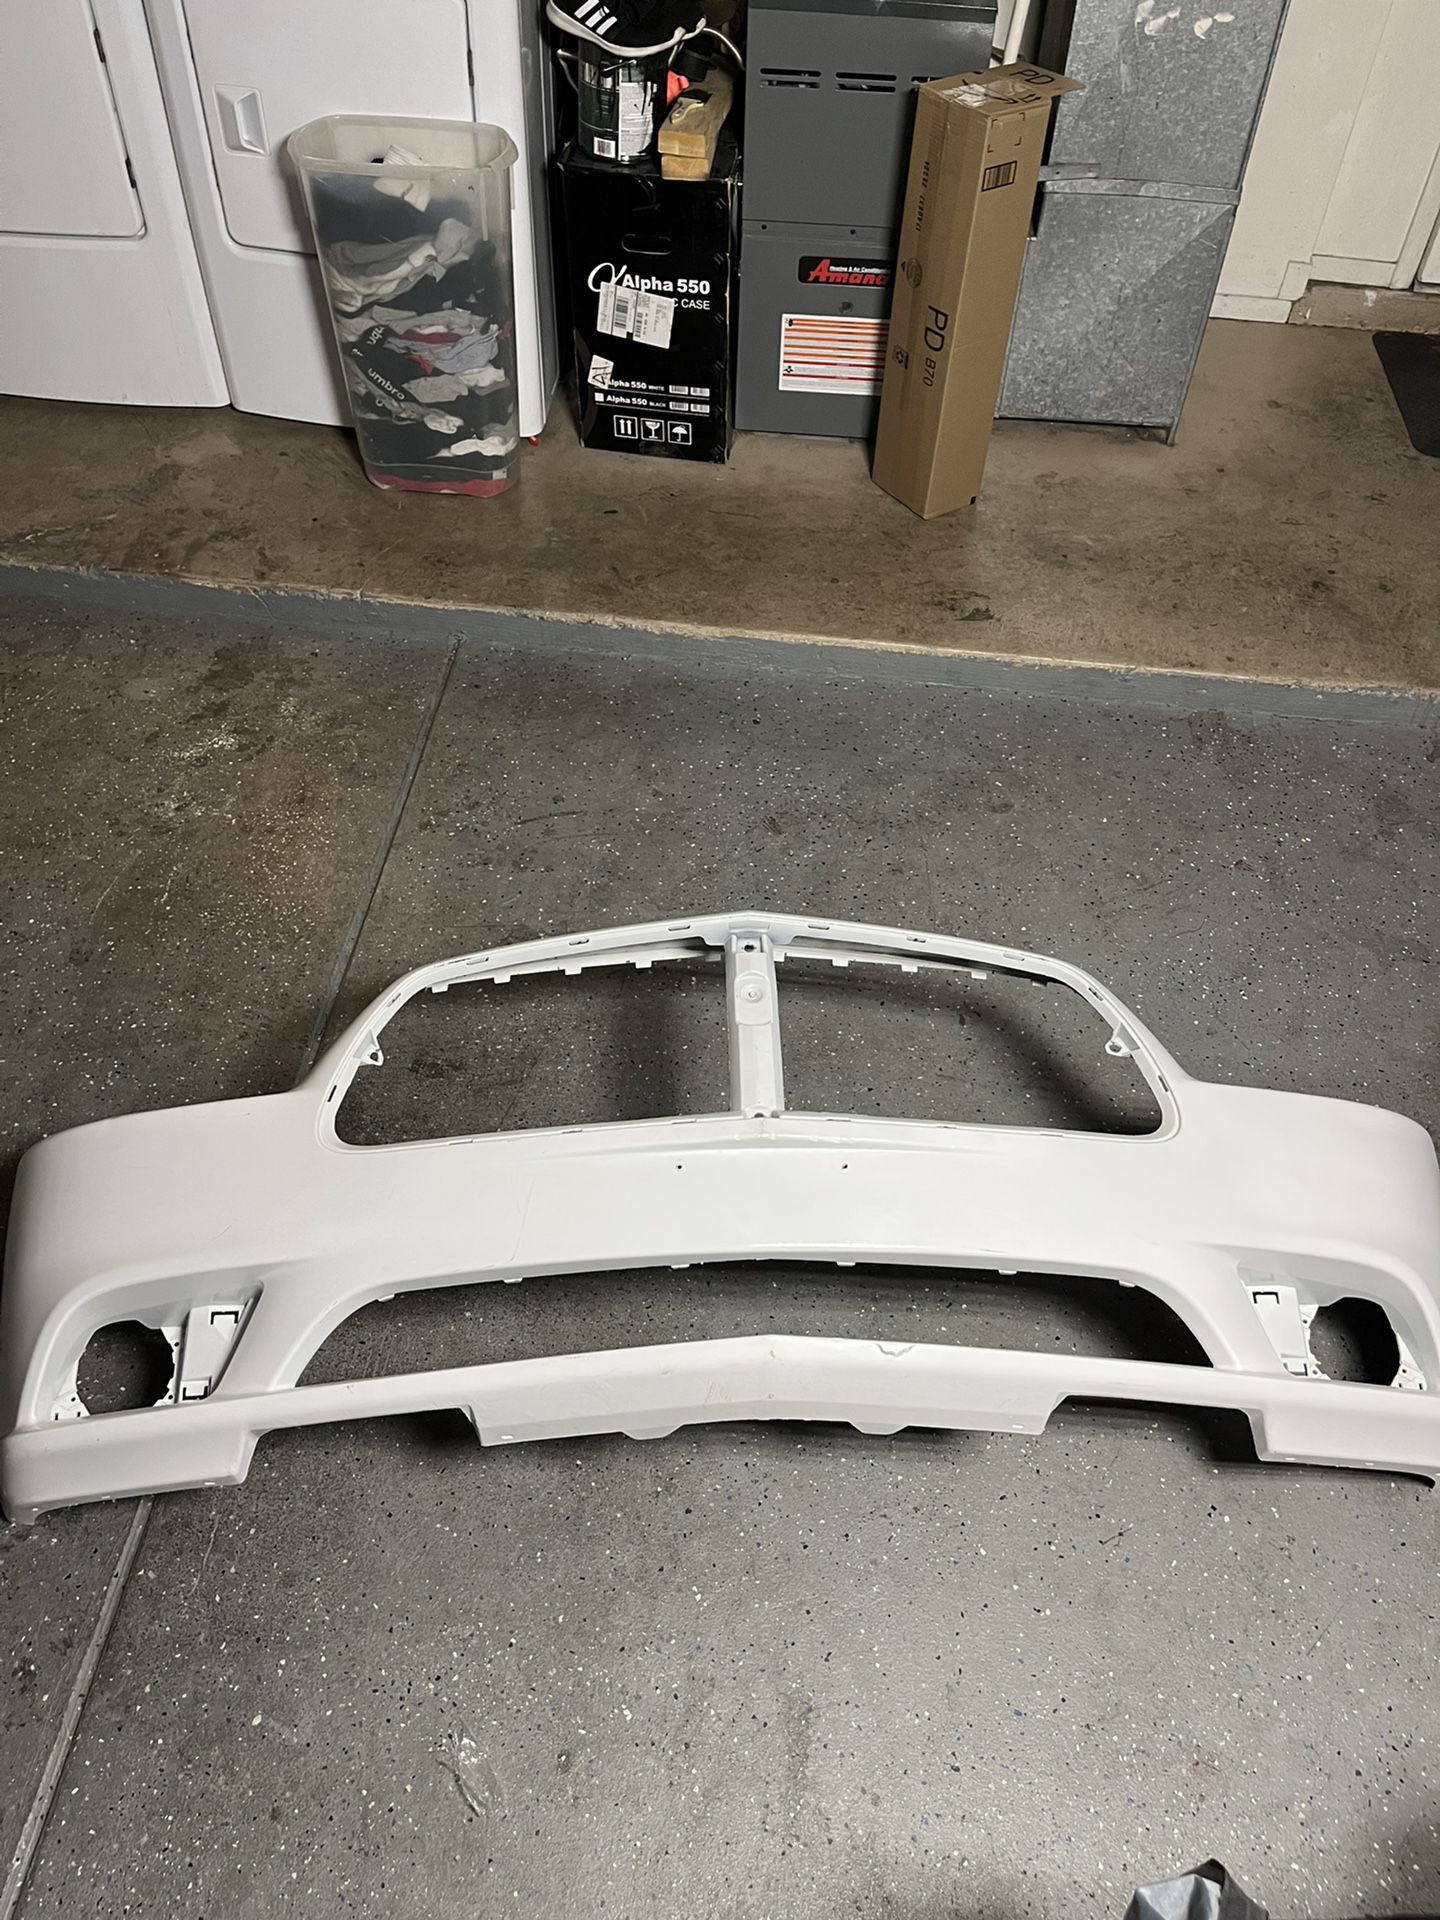 Charger 2011-2014 Front Bumper